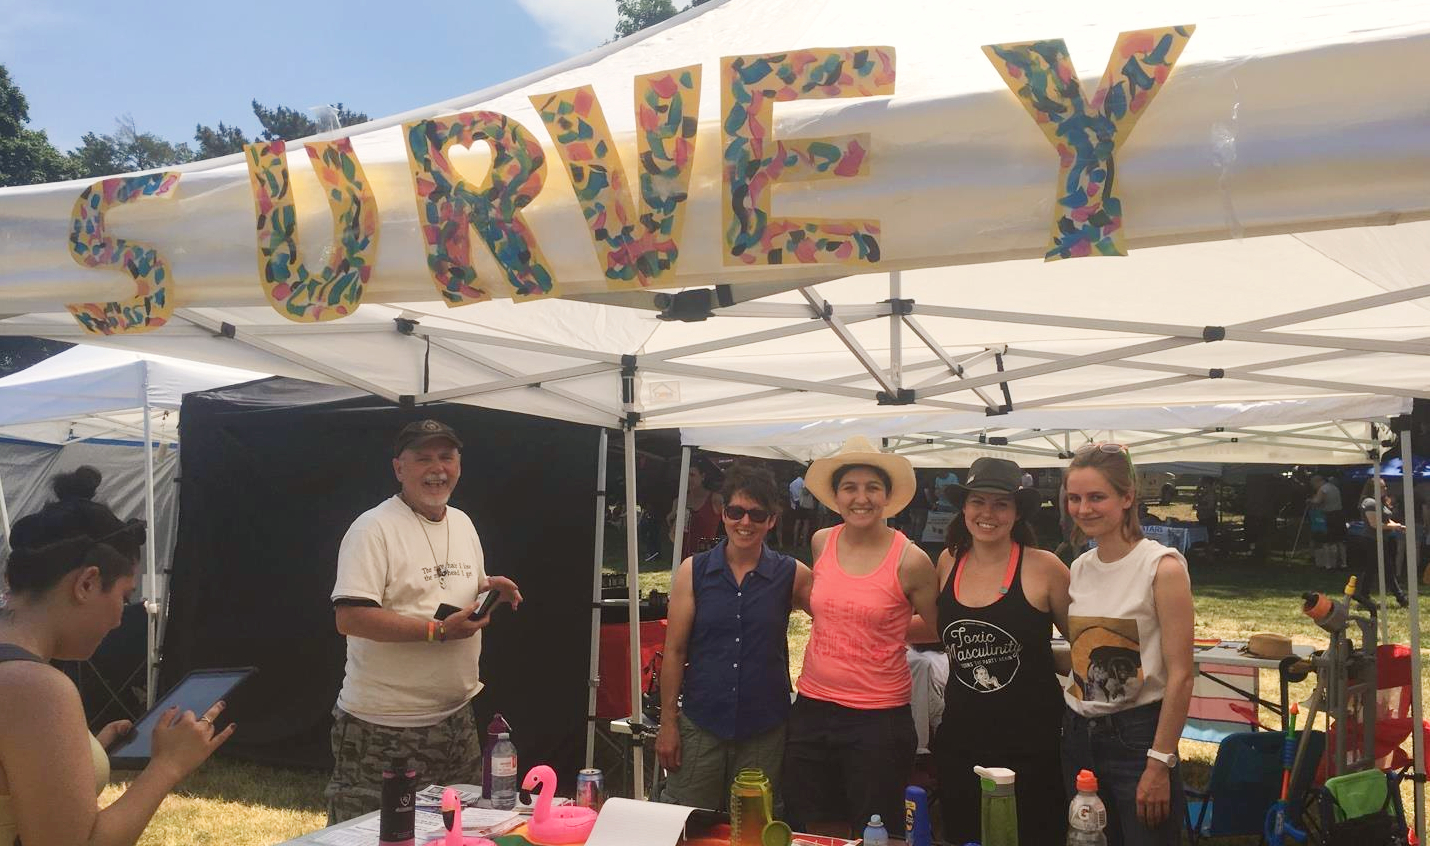 canvas tent at a festival with giant letters spelling out "survey" from 2018 Hamilton Pride festival.